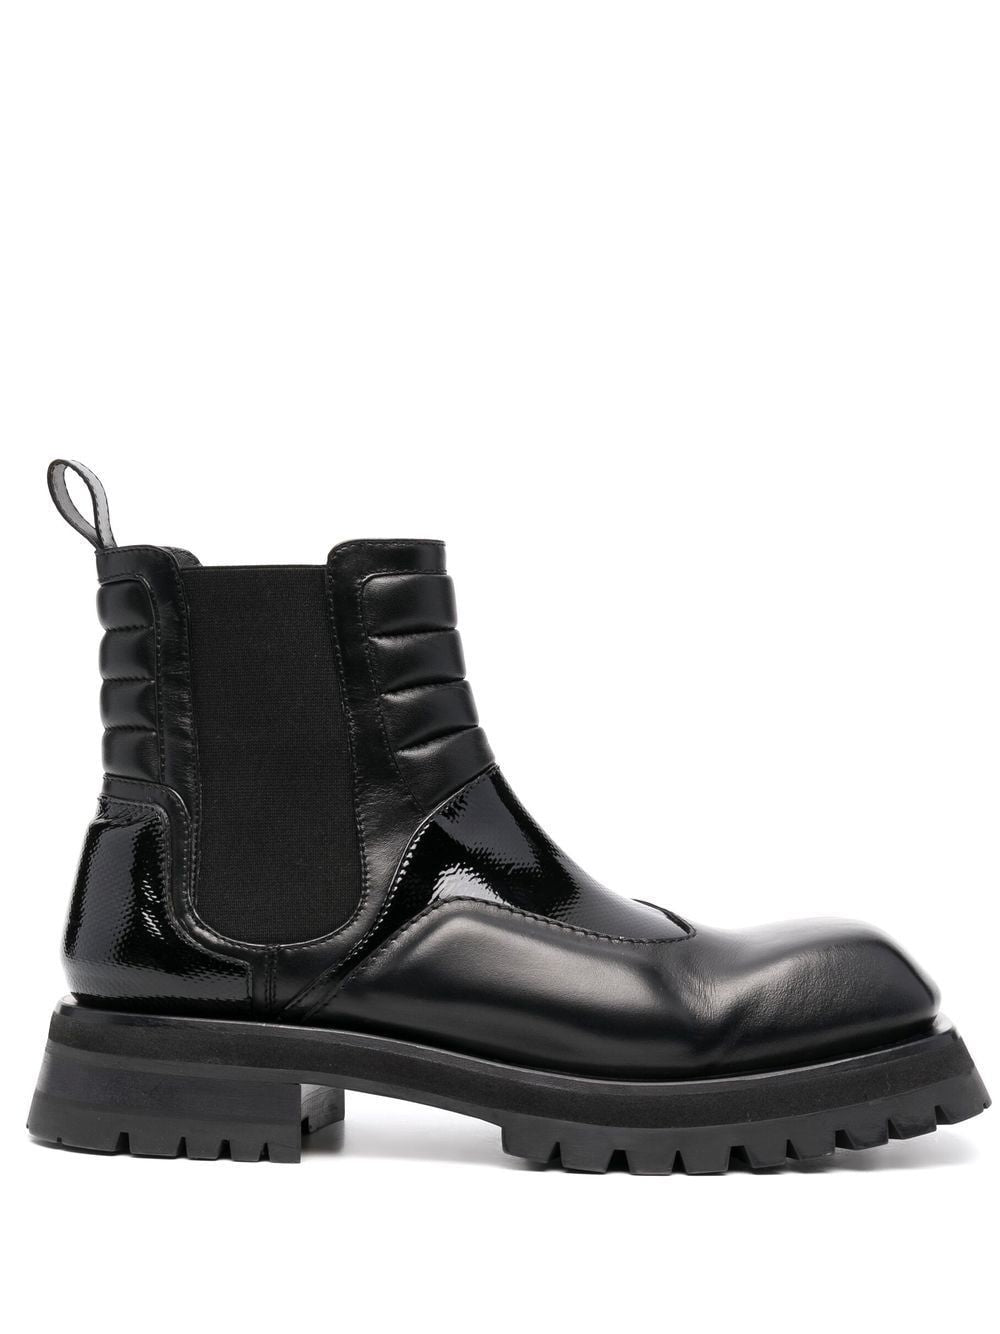 BALMAIN Stylish Men's Boots for FW22 Collection